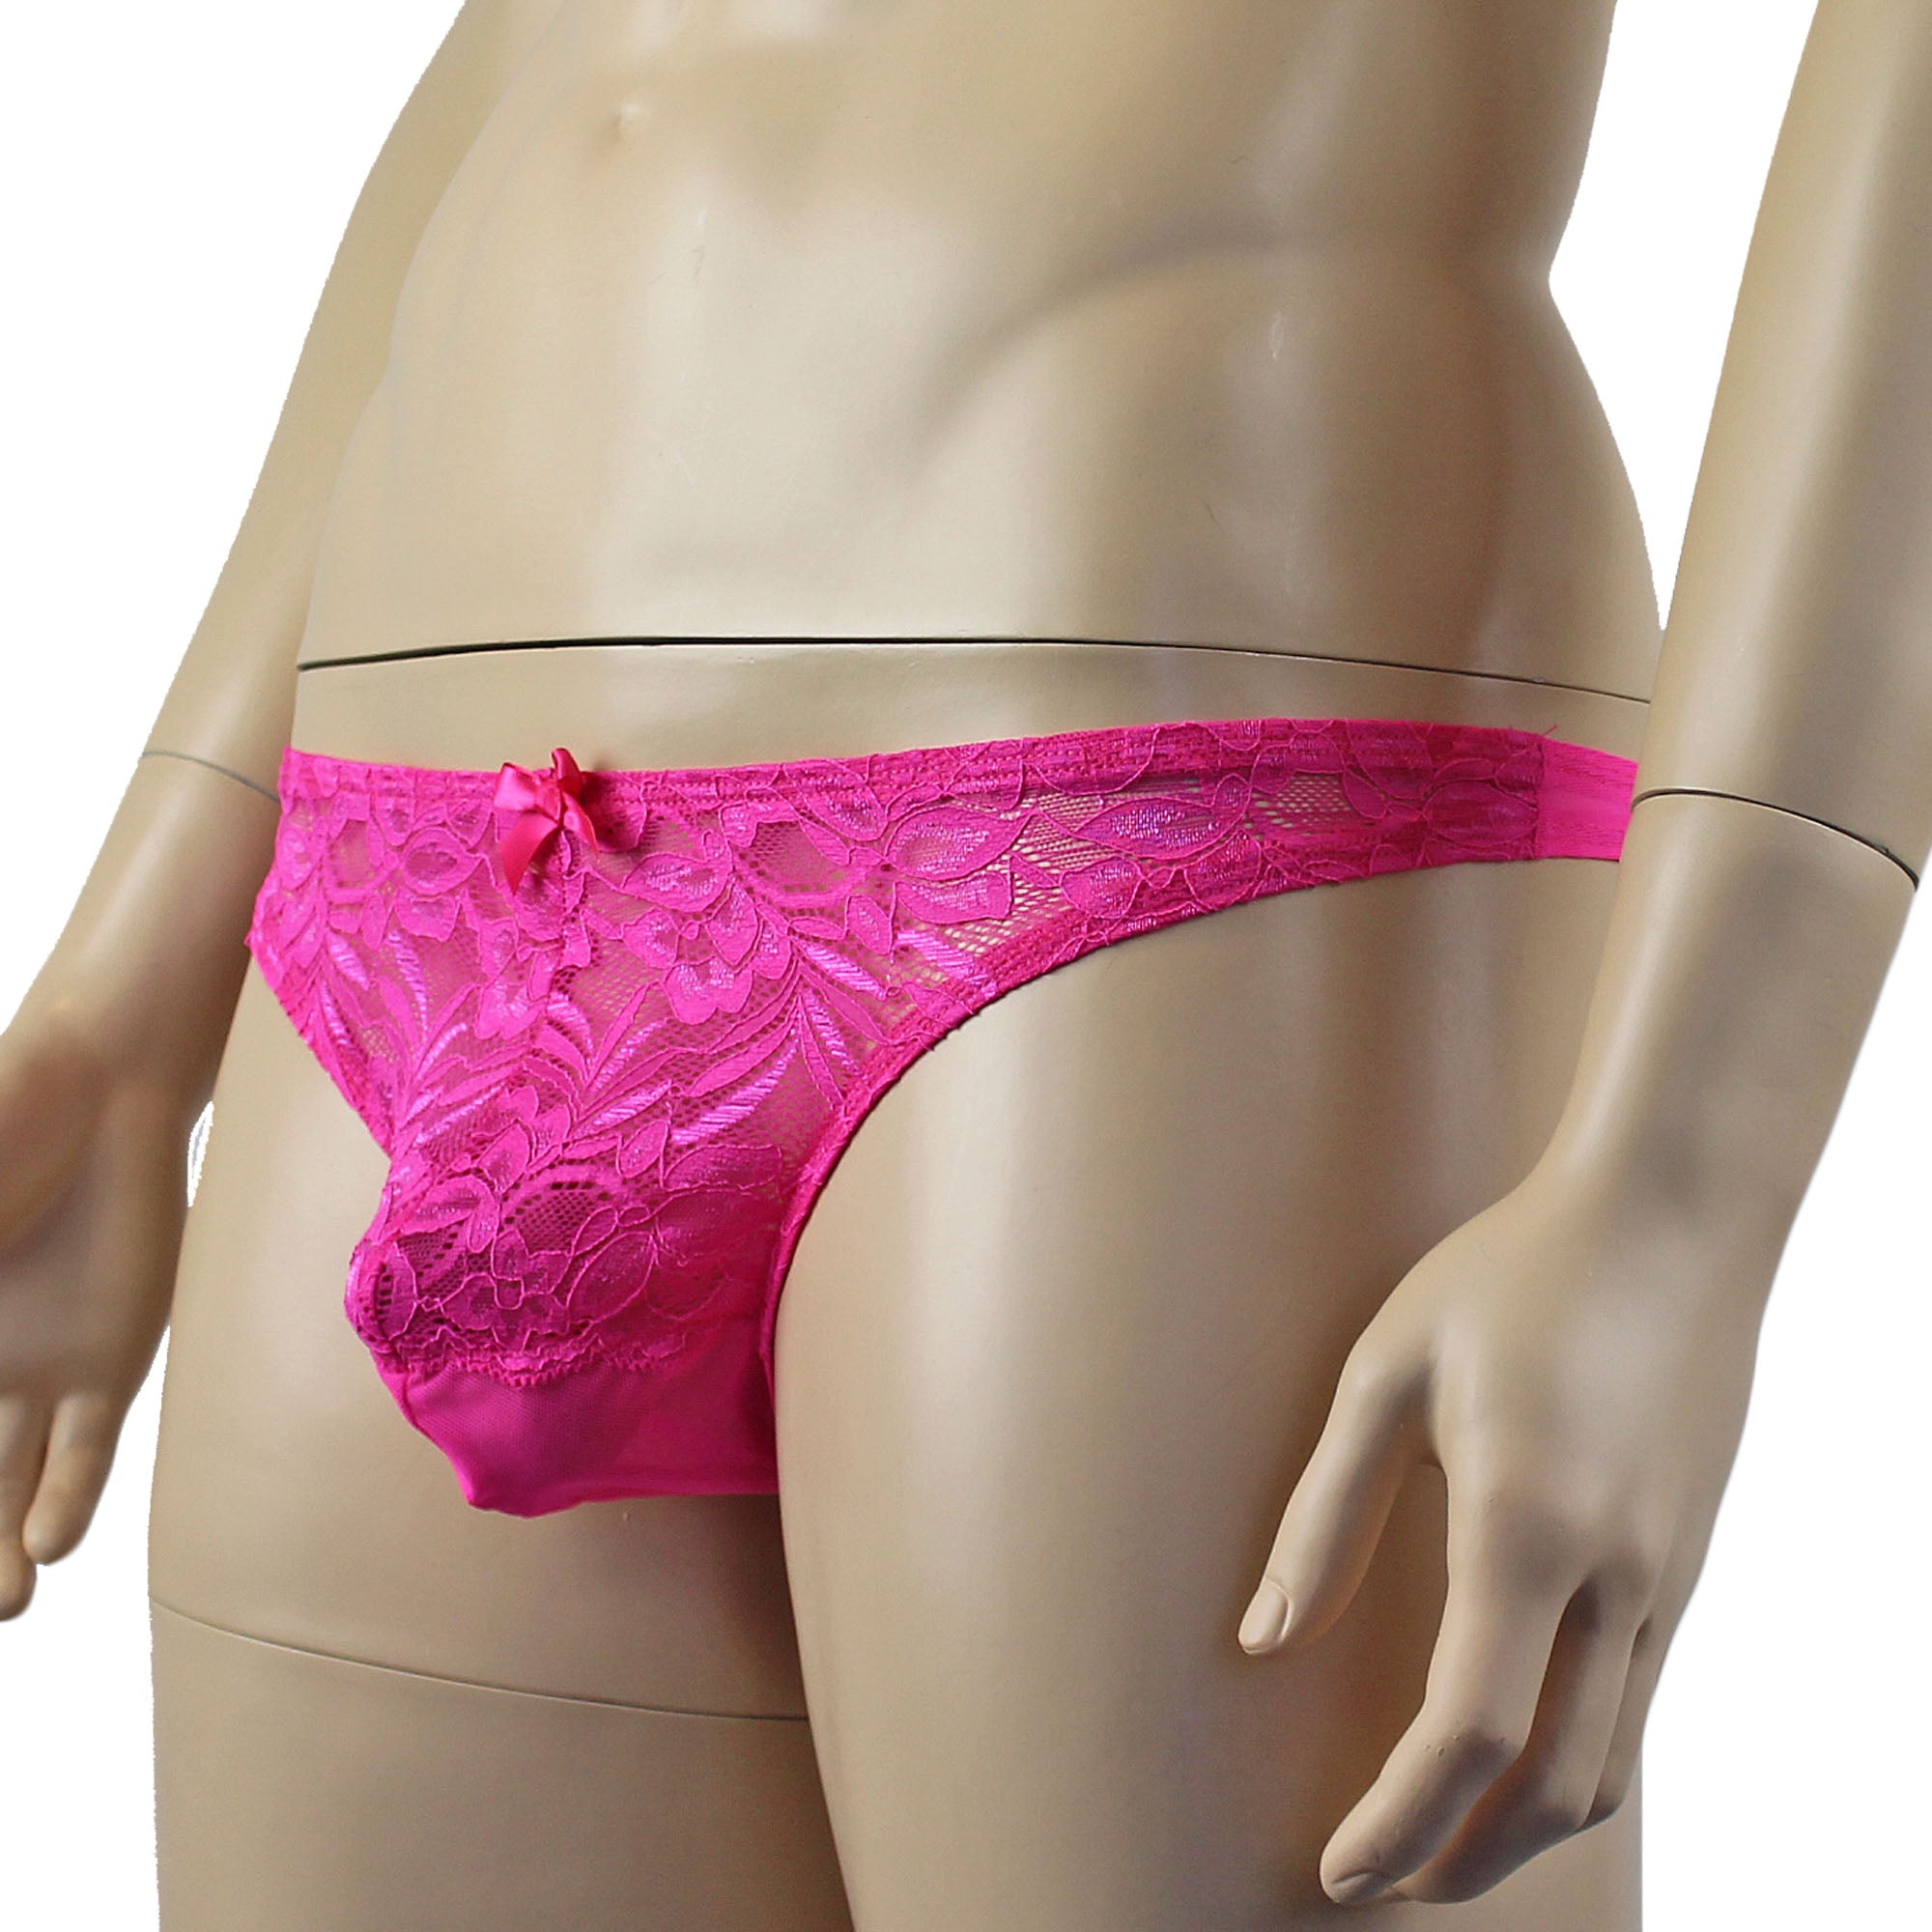 Mens Kristy Sexy Lace Thong Panties with Stretch Mesh Back Hot Pink